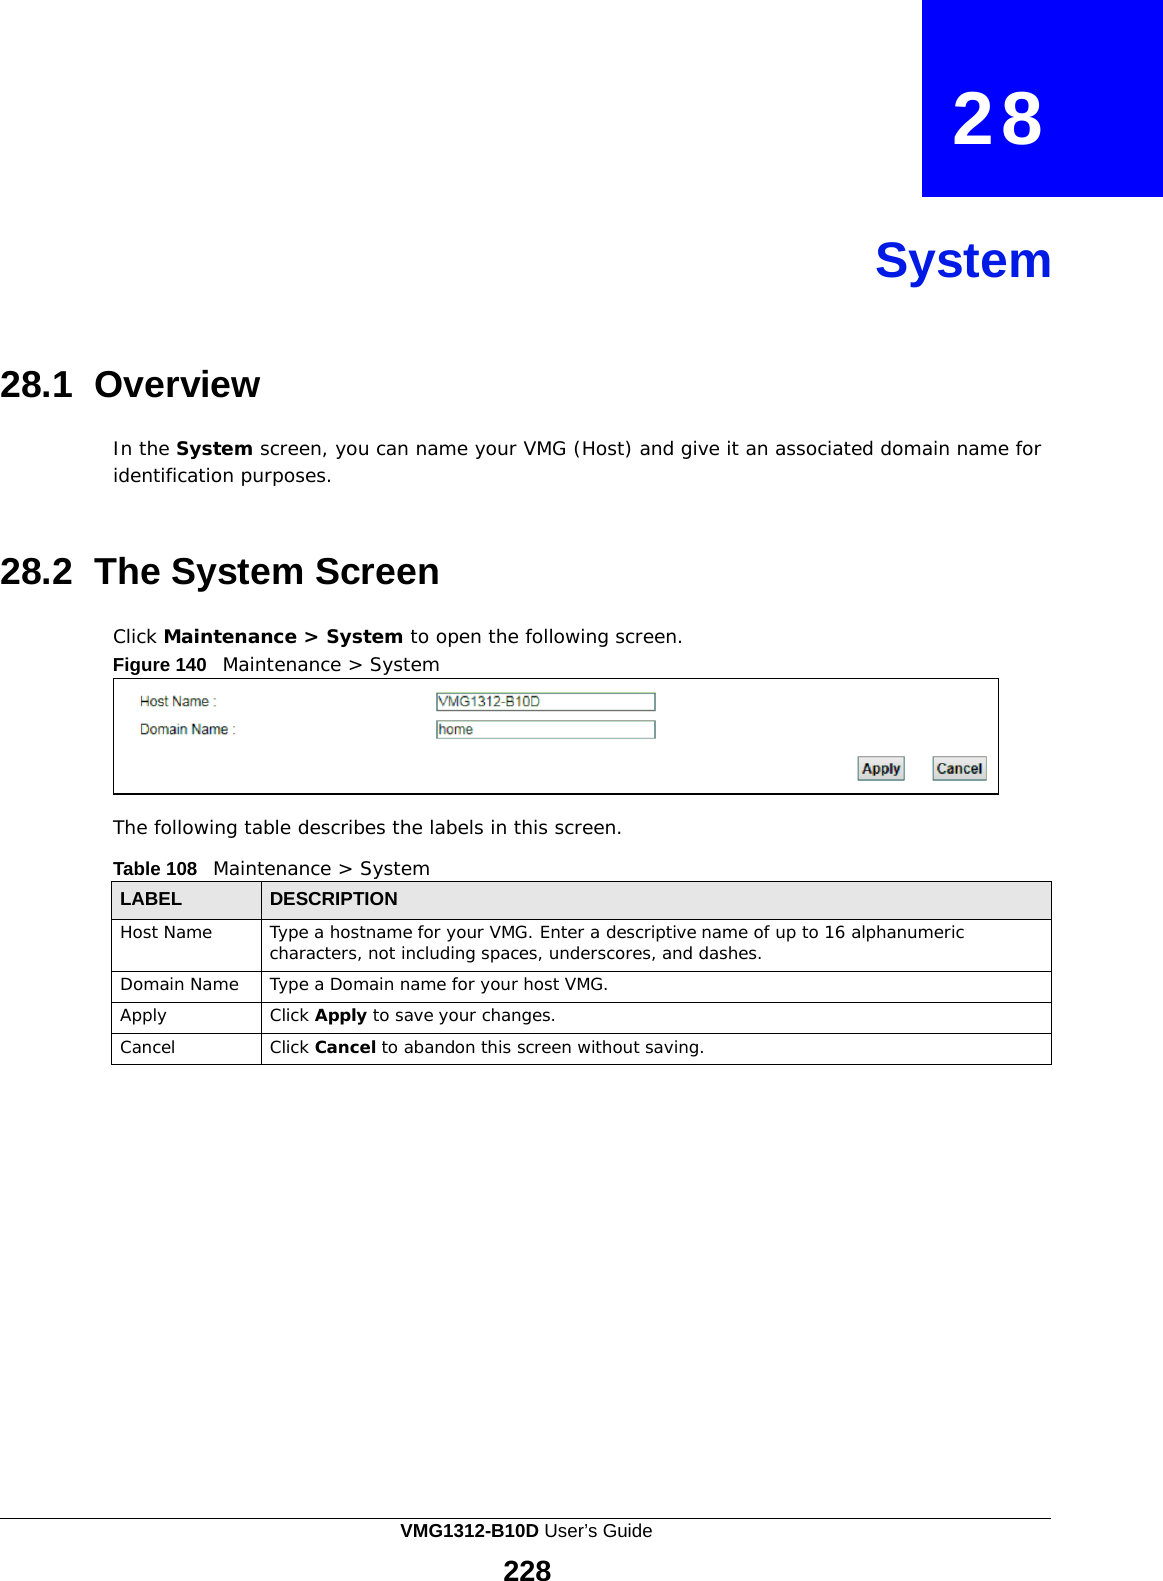 28       System     28.1 Overview   In the System screen, you can name your VMG (Host) and give it an associated domain name for identification purposes.    28.2  The System Screen   Click Maintenance &gt; System to open the following screen. Figure 140   Maintenance &gt; System        The following table describes the labels in this screen.  Table 108   Maintenance &gt; System  LABEL DESCRIPTION Host Name Type a hostname for your VMG. Enter a descriptive name of up to 16 alphanumeric characters, not including spaces, underscores, and dashes. Domain Name Type a Domain name for your host VMG. Apply Click Apply to save your changes. Cancel Click Cancel to abandon this screen without saving. VMG1312-B10D User’s Guide  228  